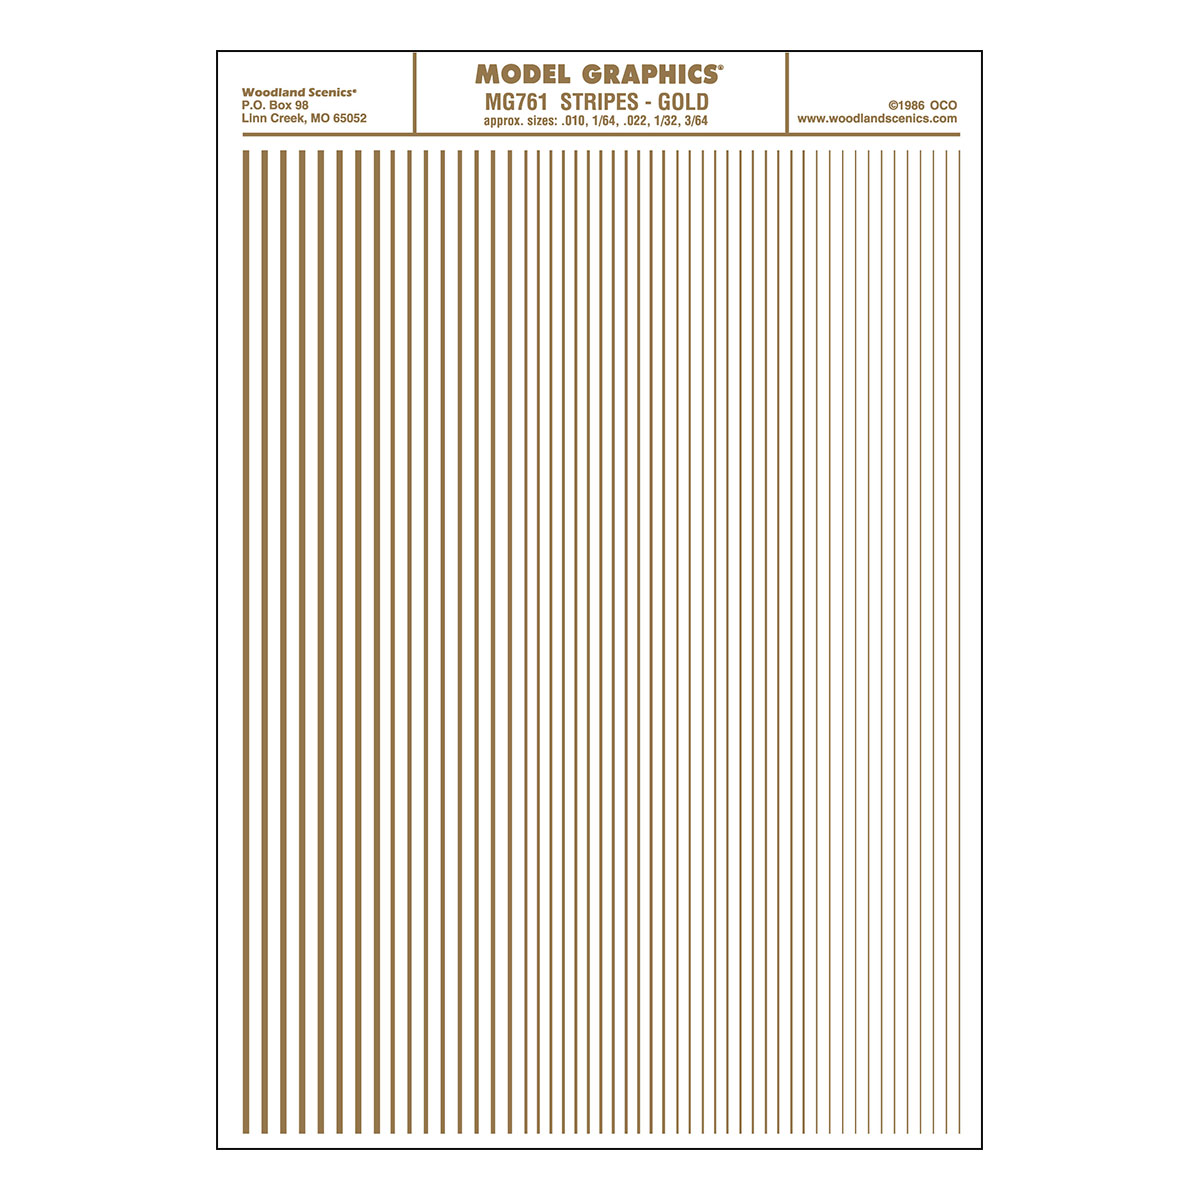 Stripes Gold - Package contains one sheet: 5 5/8" x 8 1/4" (14